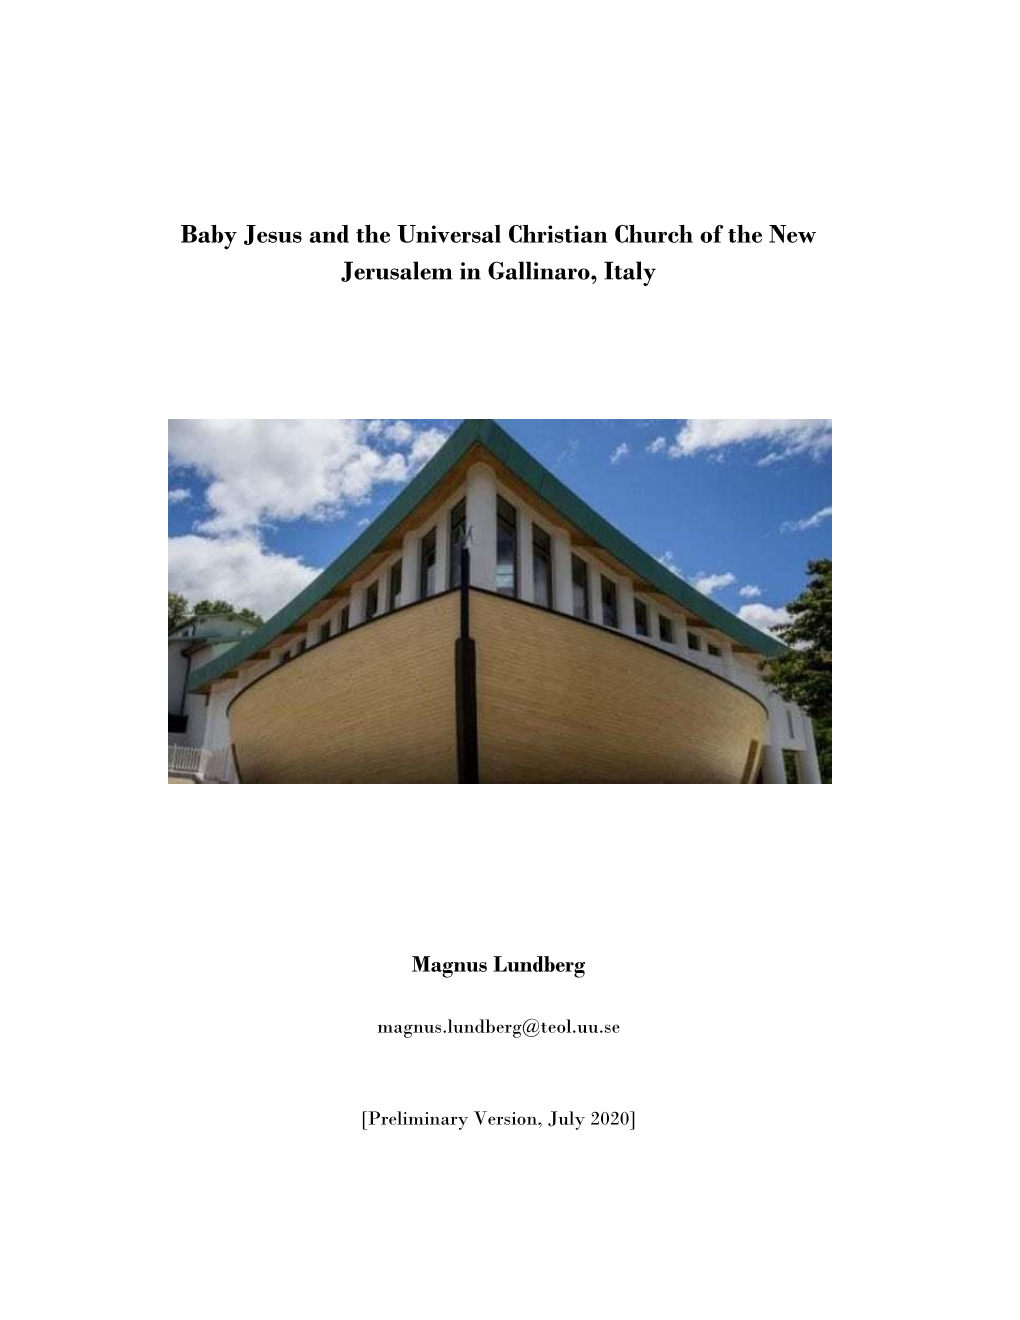 Baby Jesus and the Universal Christian Church of the New Jerusalem in Gallinaro, Italy